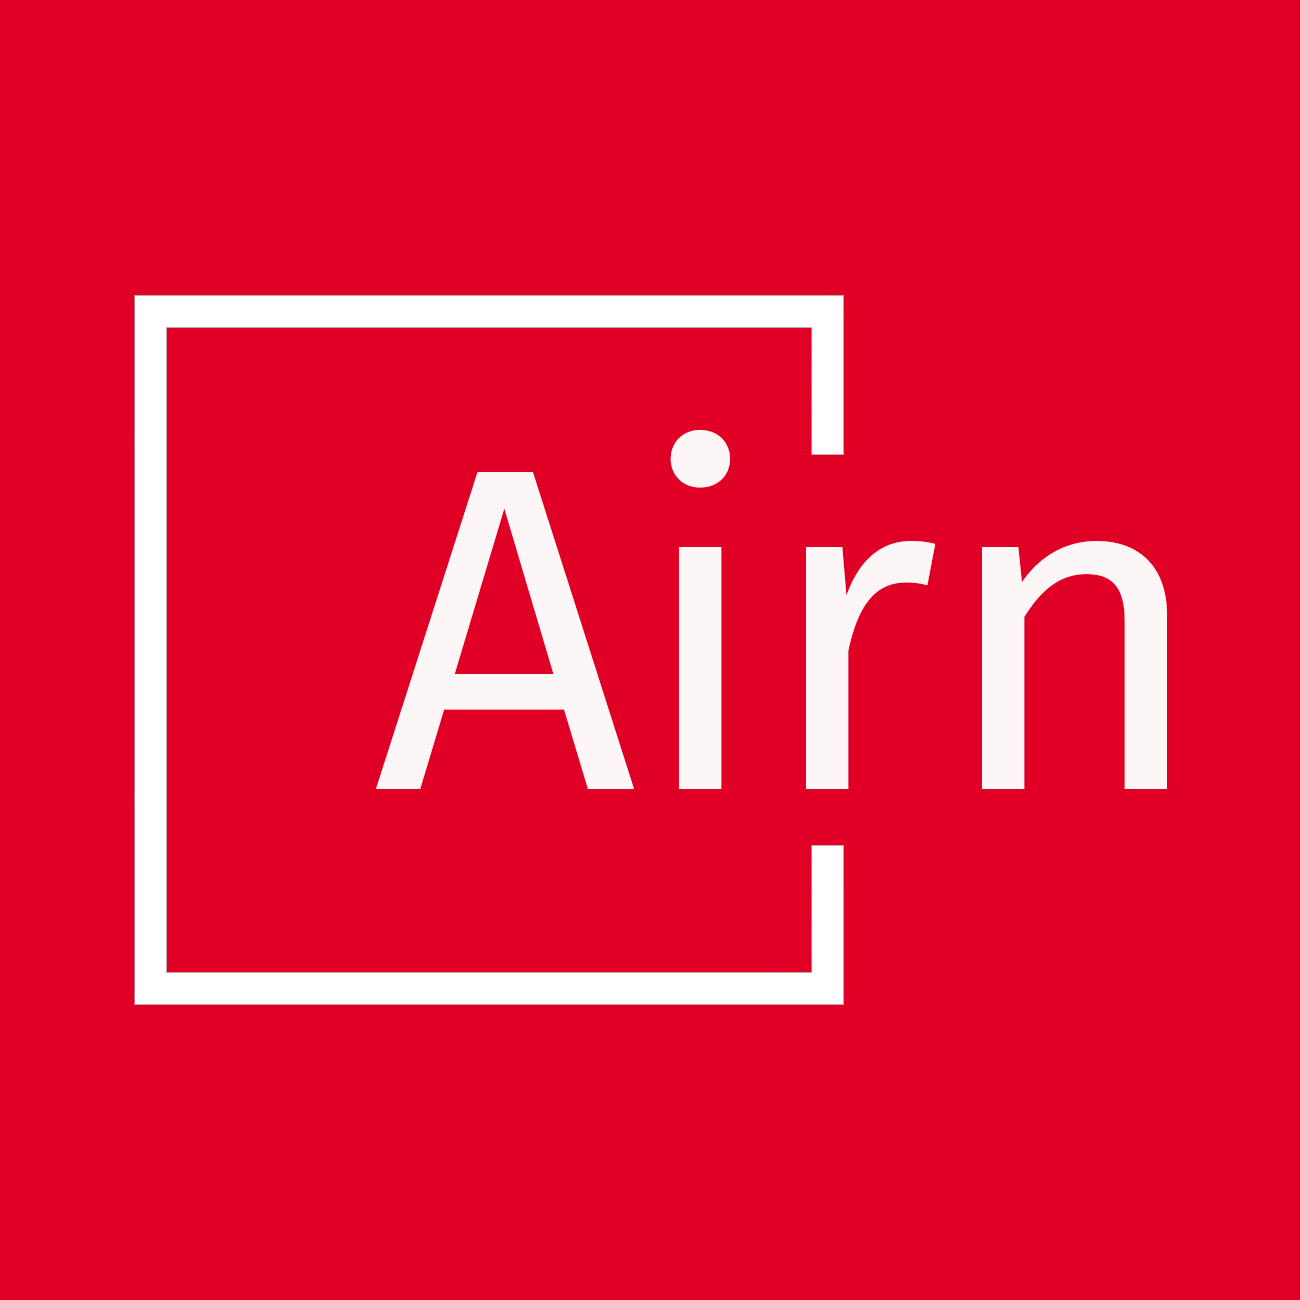 Airn - Your AI Personal Growth Coach